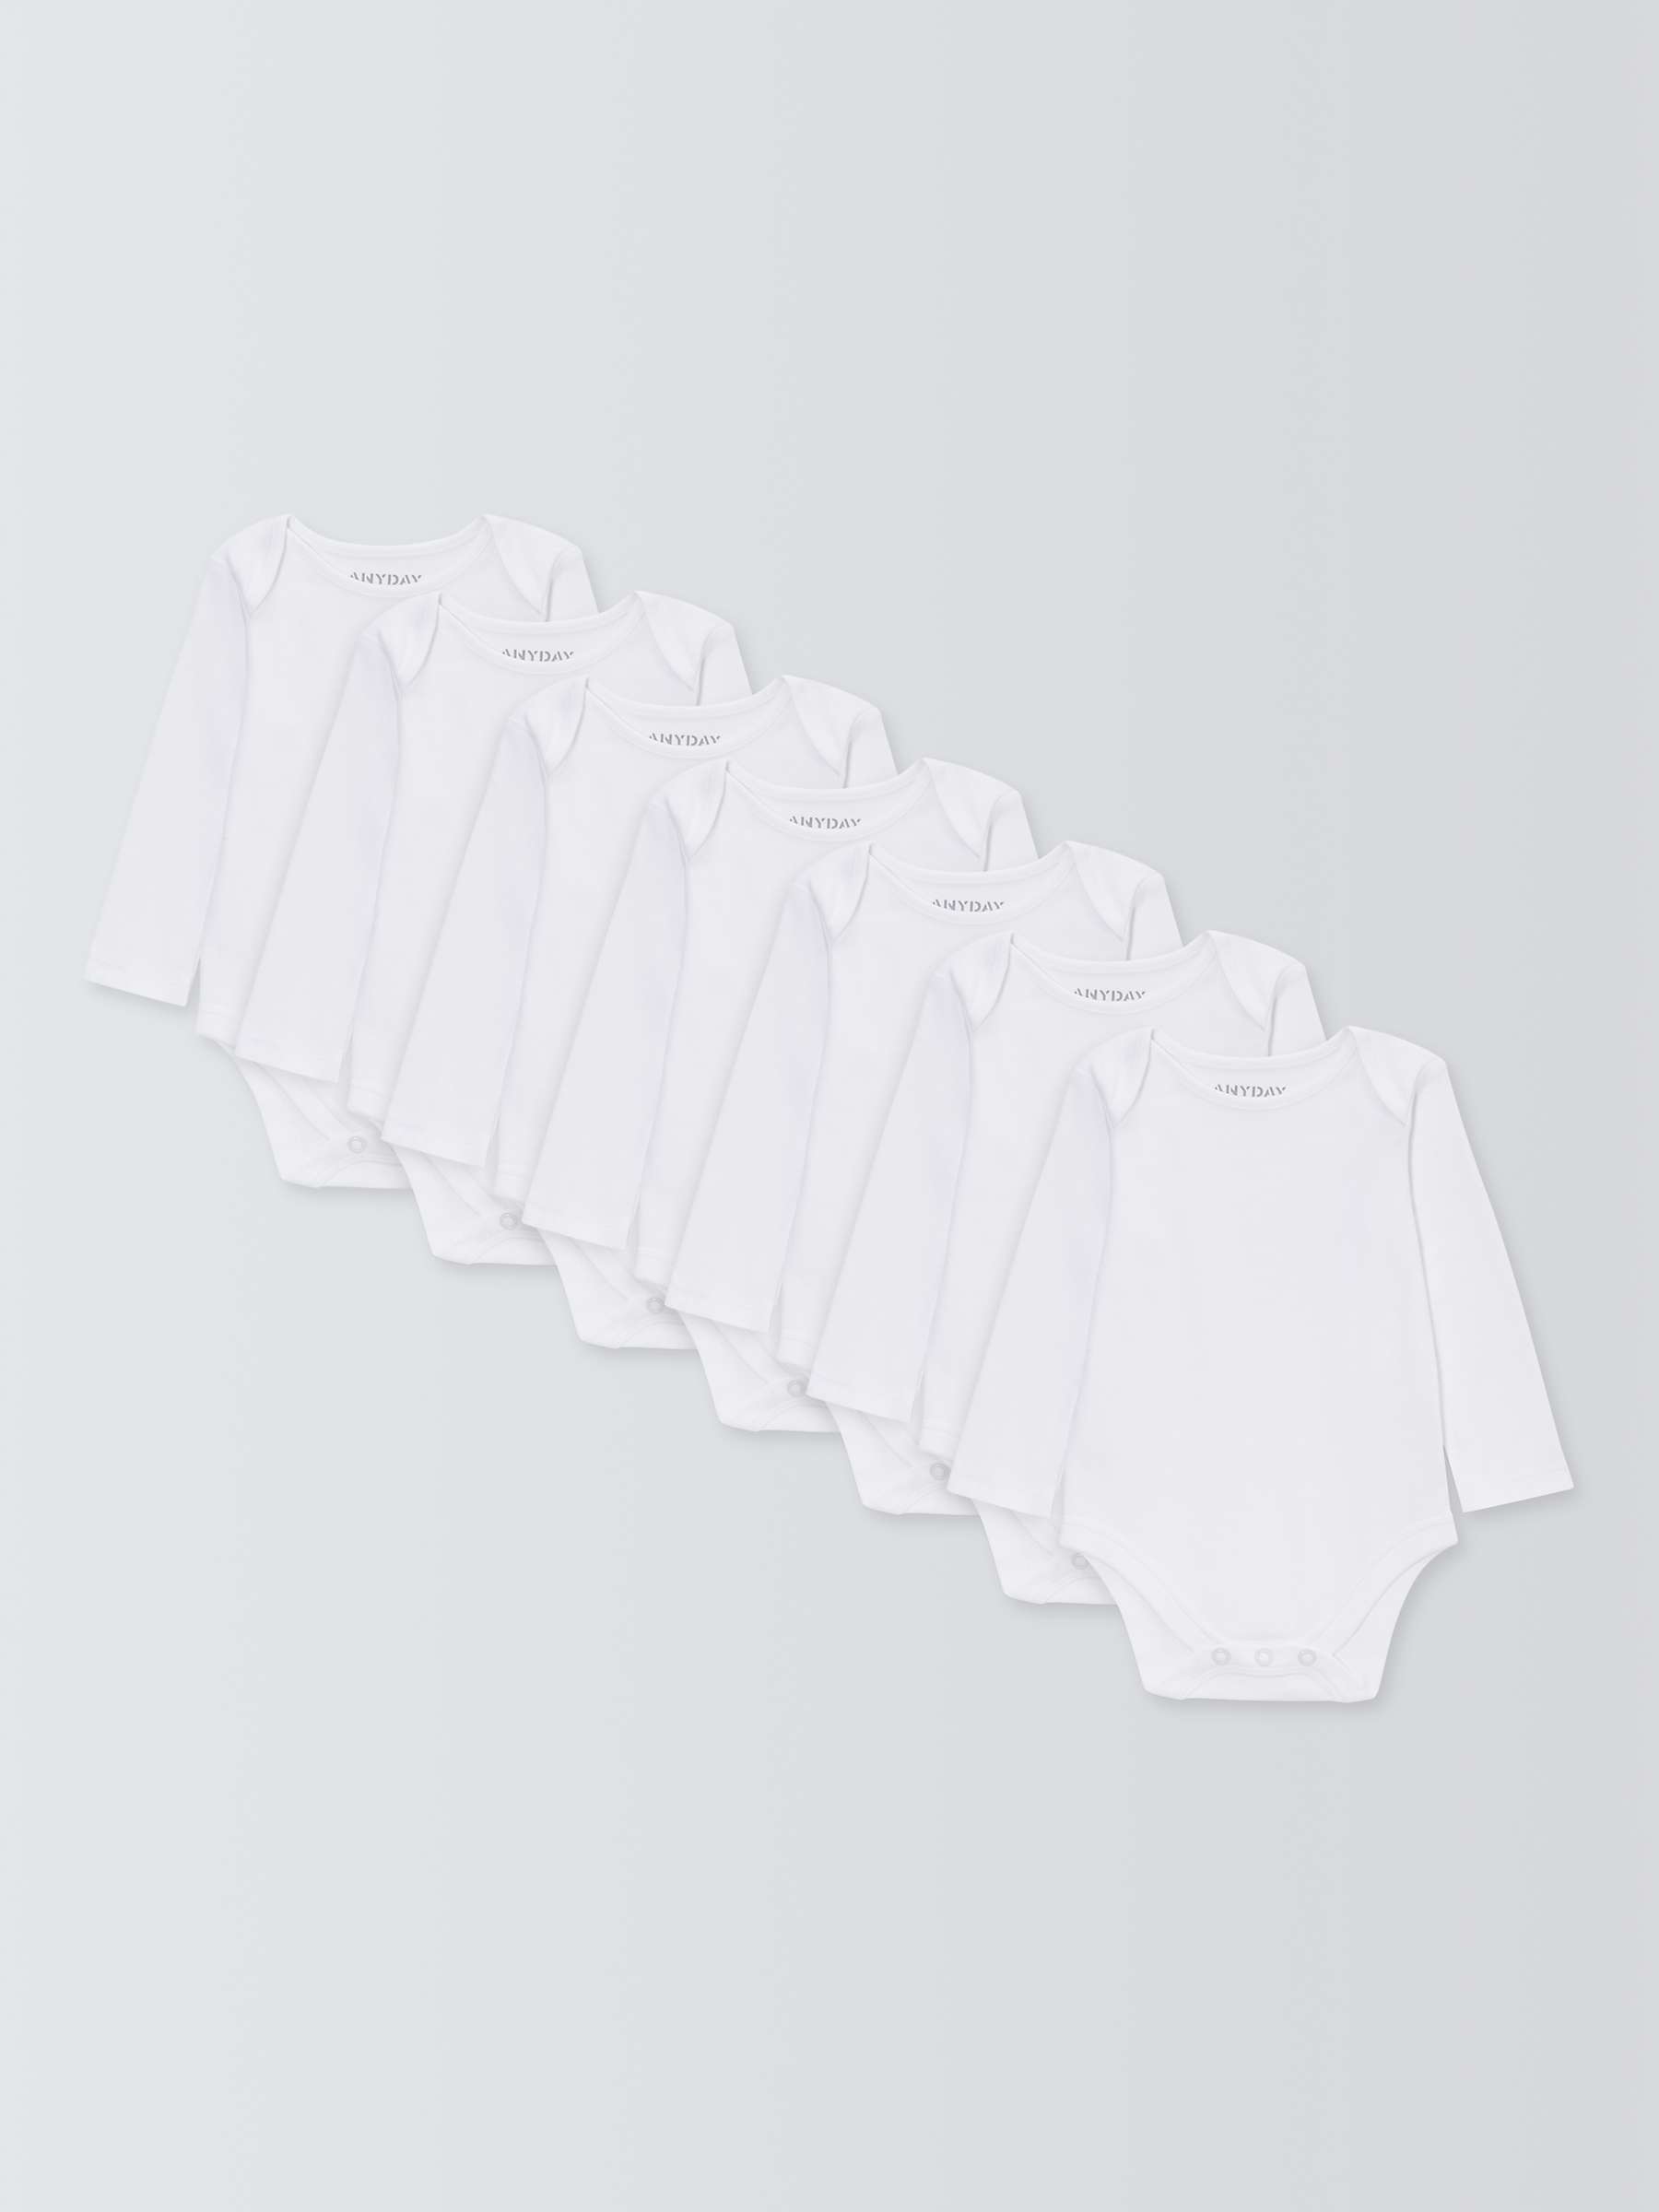 Buy John Lewis ANYDAY Baby Long Sleeve Bodysuit, Pack of 7, White Online at johnlewis.com